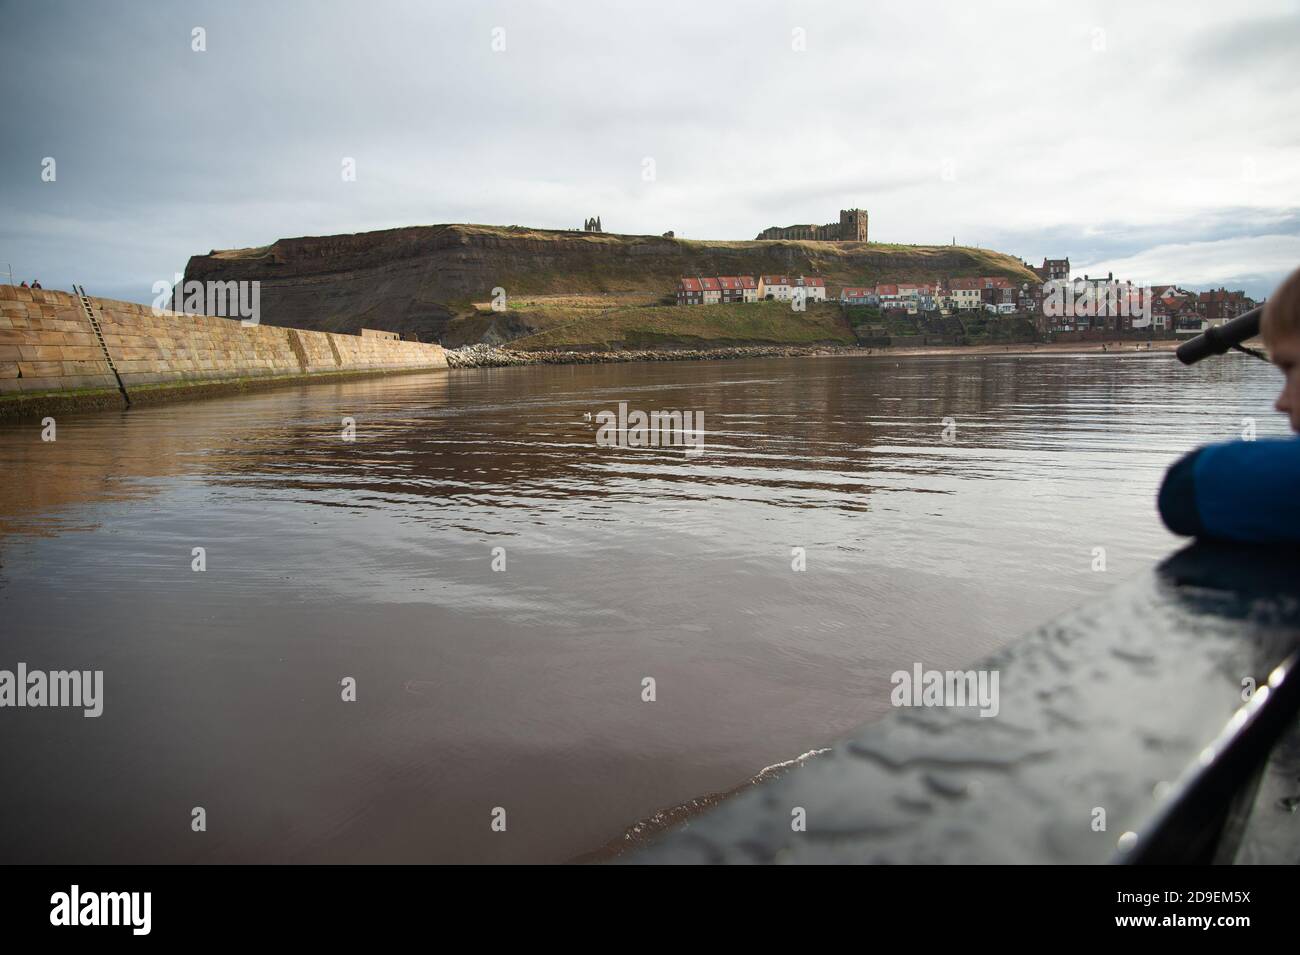 A view of the East pier, Whitby Harbour, Whitby, Yorkshire, England. Stock Photo